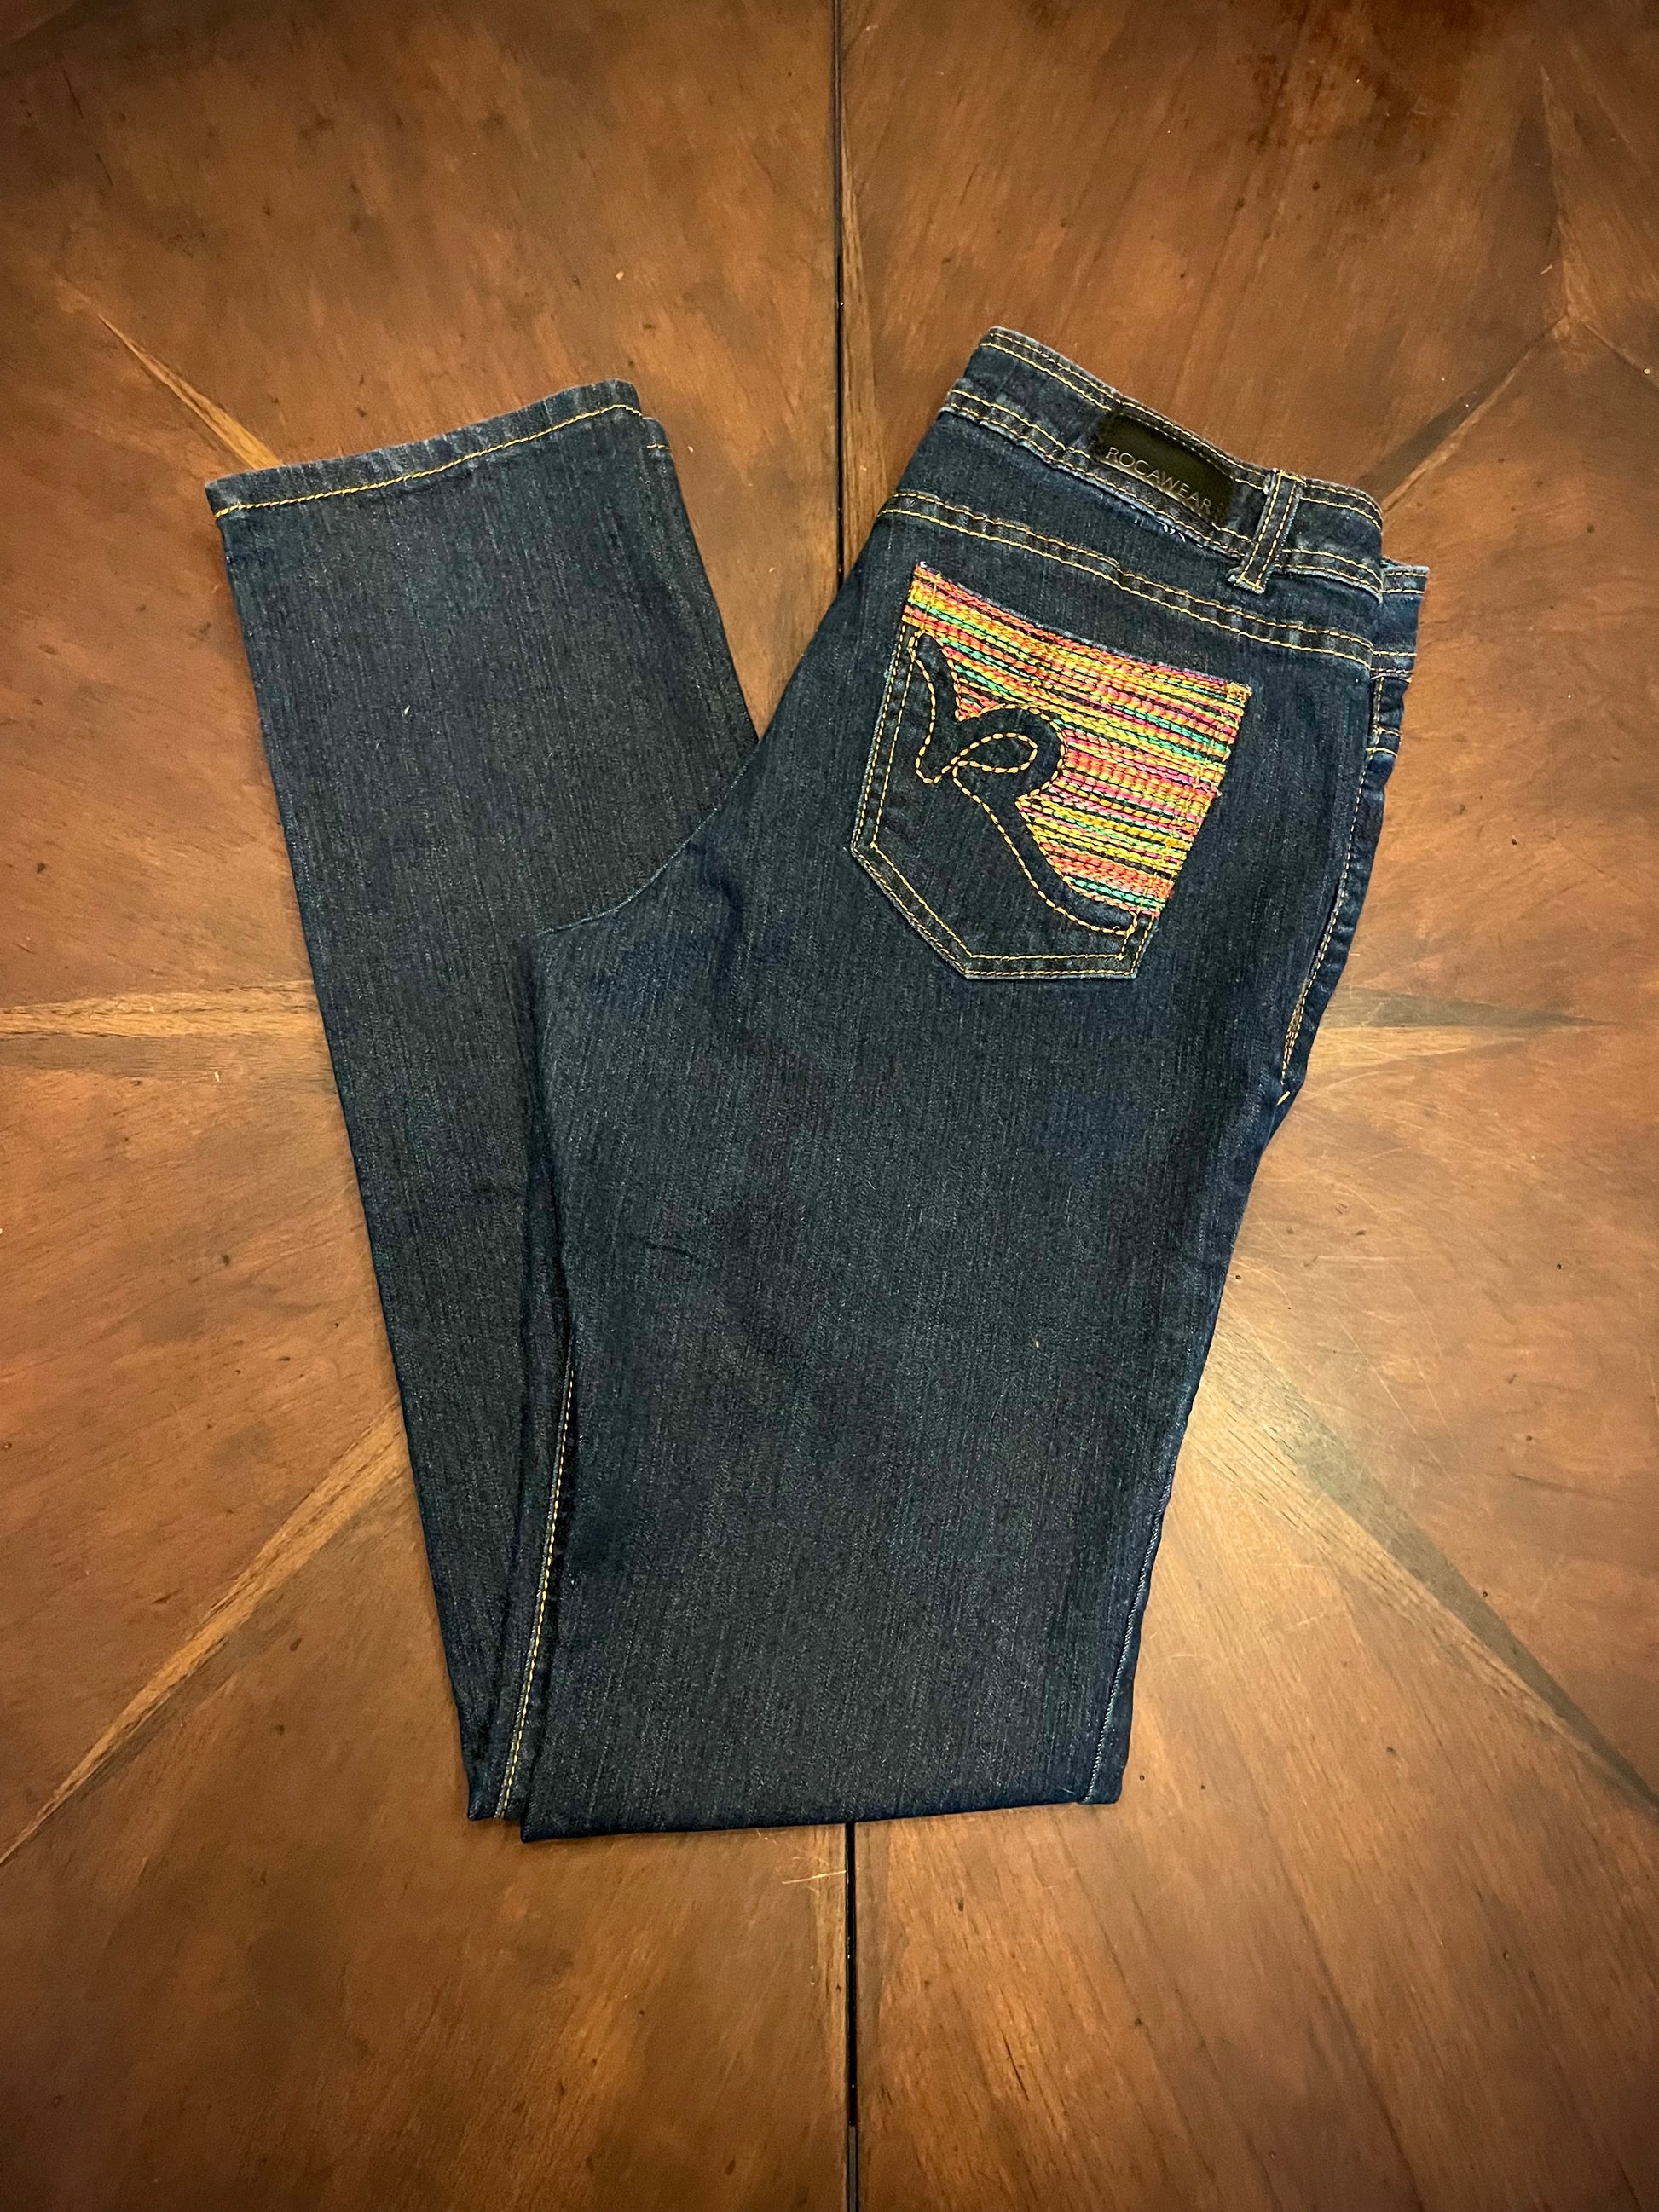 Bright Renaissance Jeans Color High-rise – Hannah Skinny 5 w/ Rocawear Salvage pkt Stitching